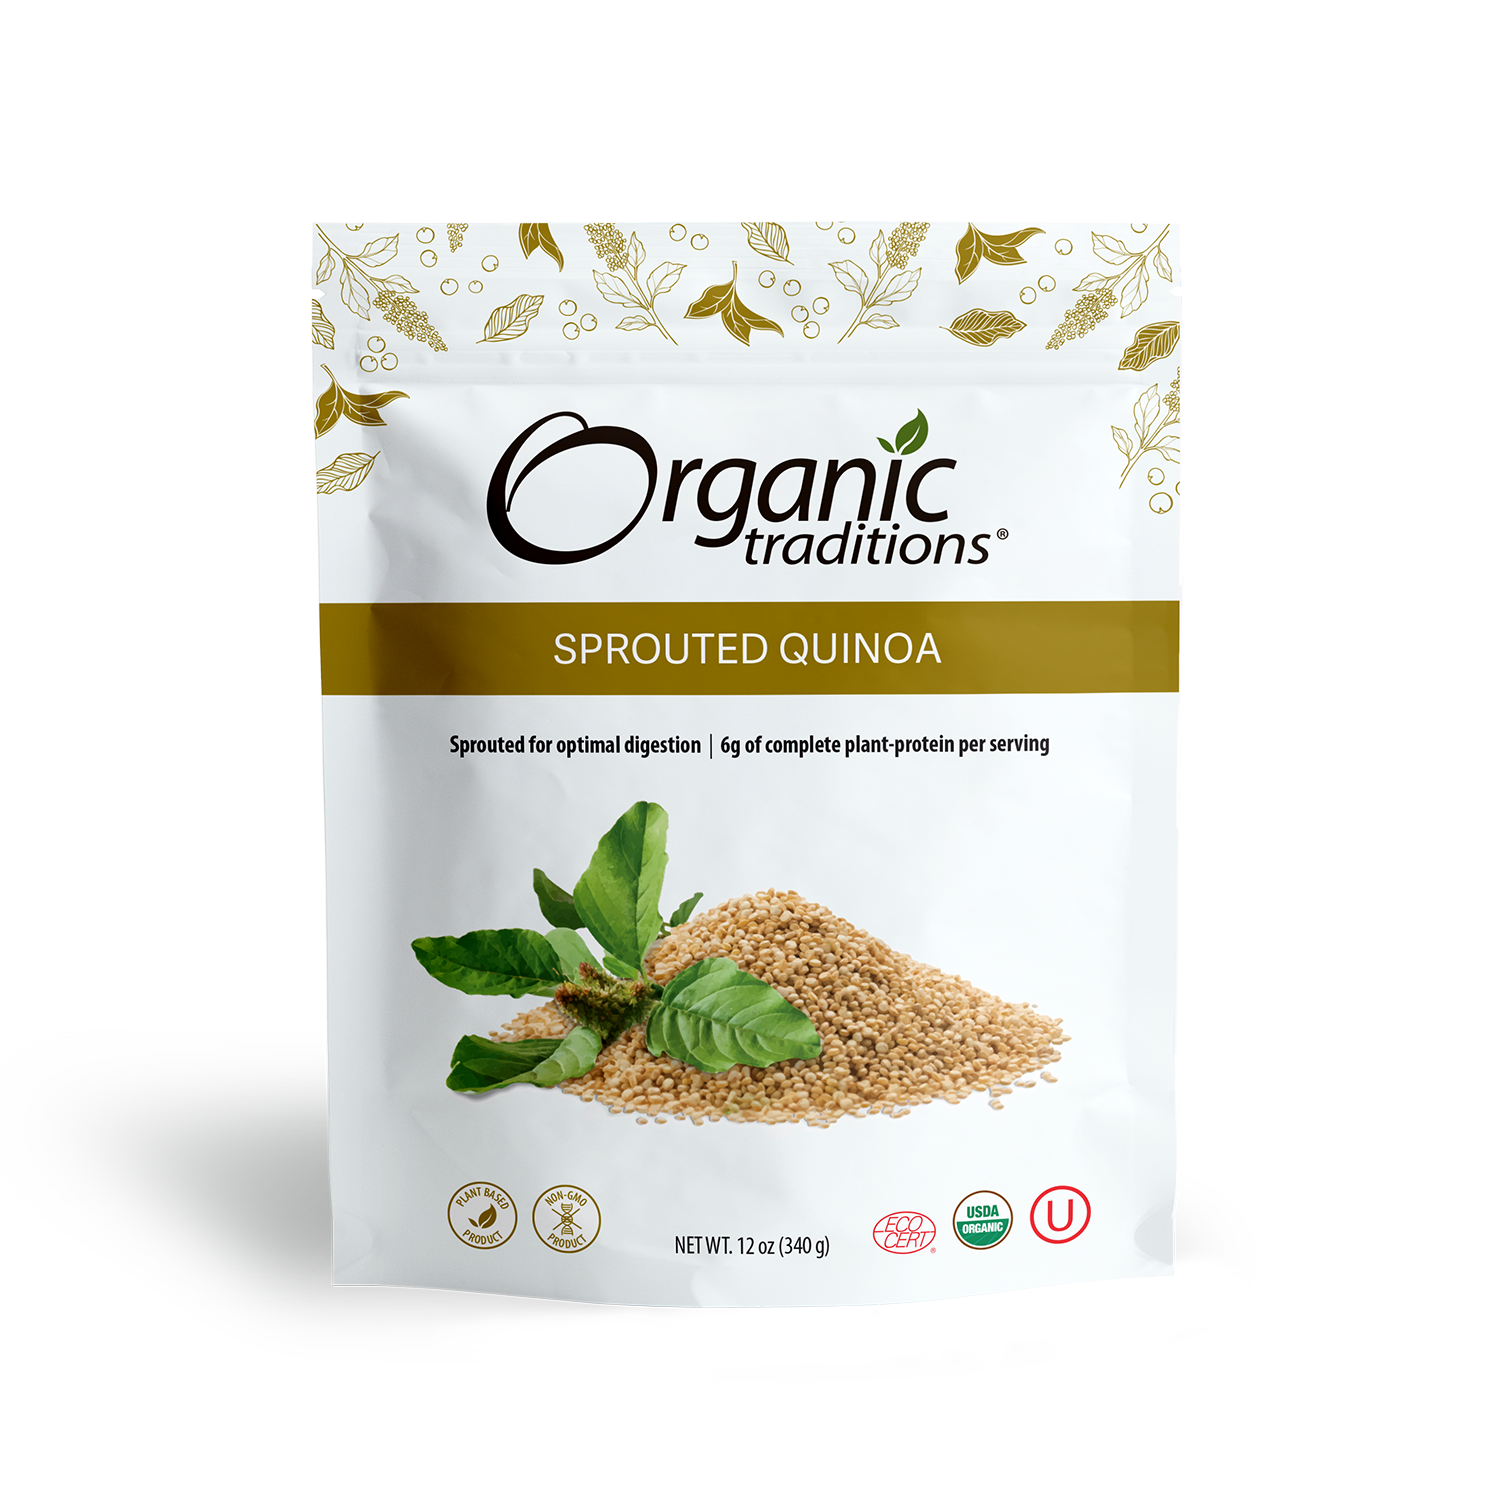 organic traditions sprouted quinoa front of bag image